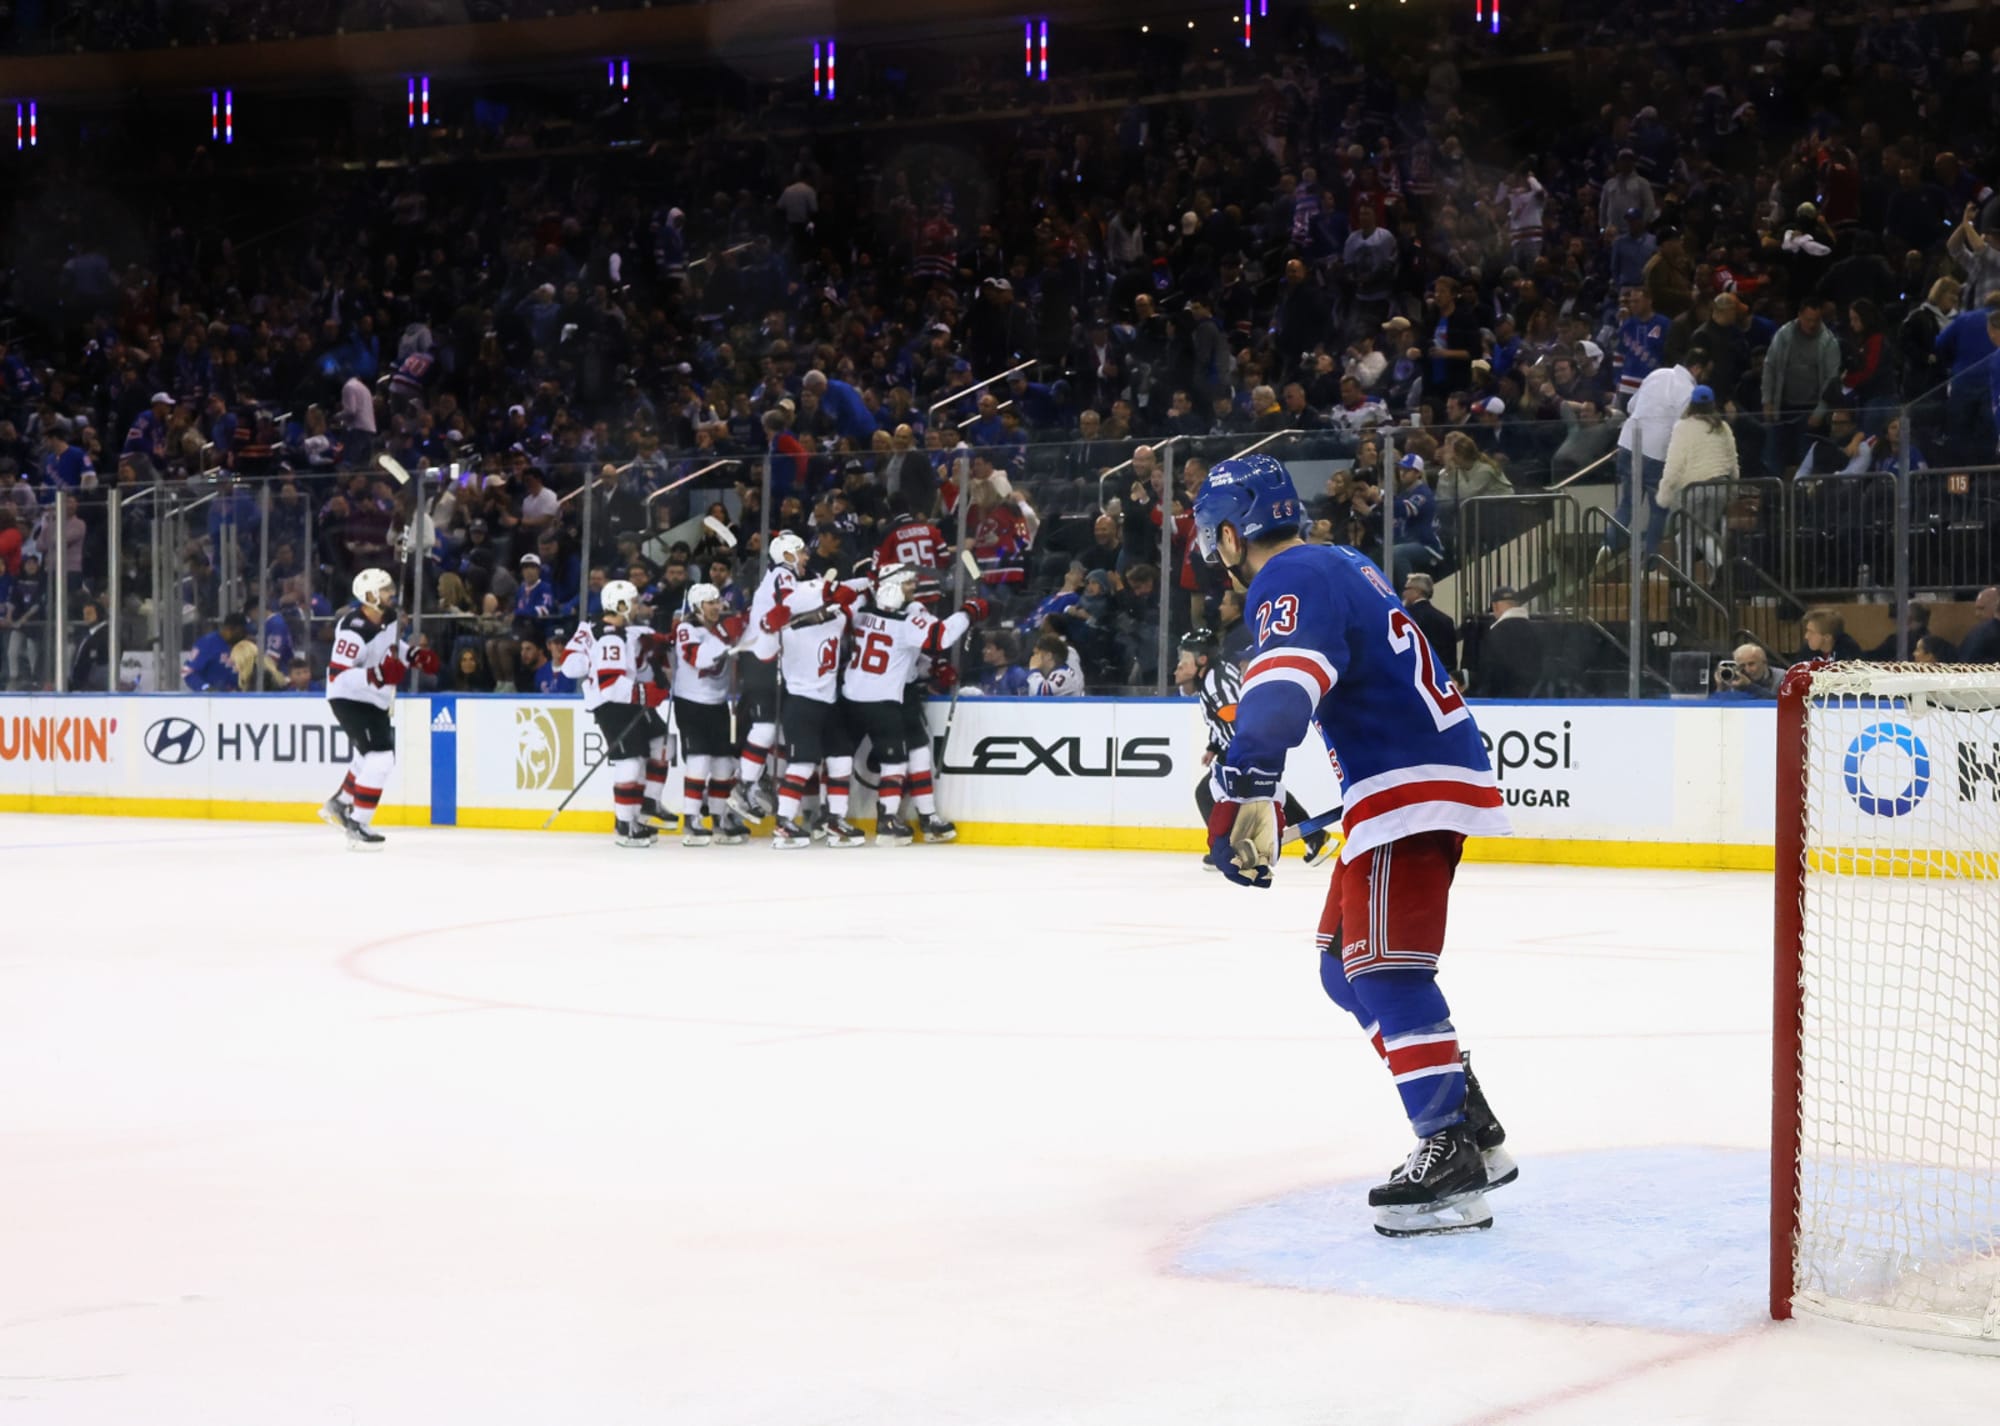 New Jersey Devils Top Players Stepped Up Big Vs NY Rangers